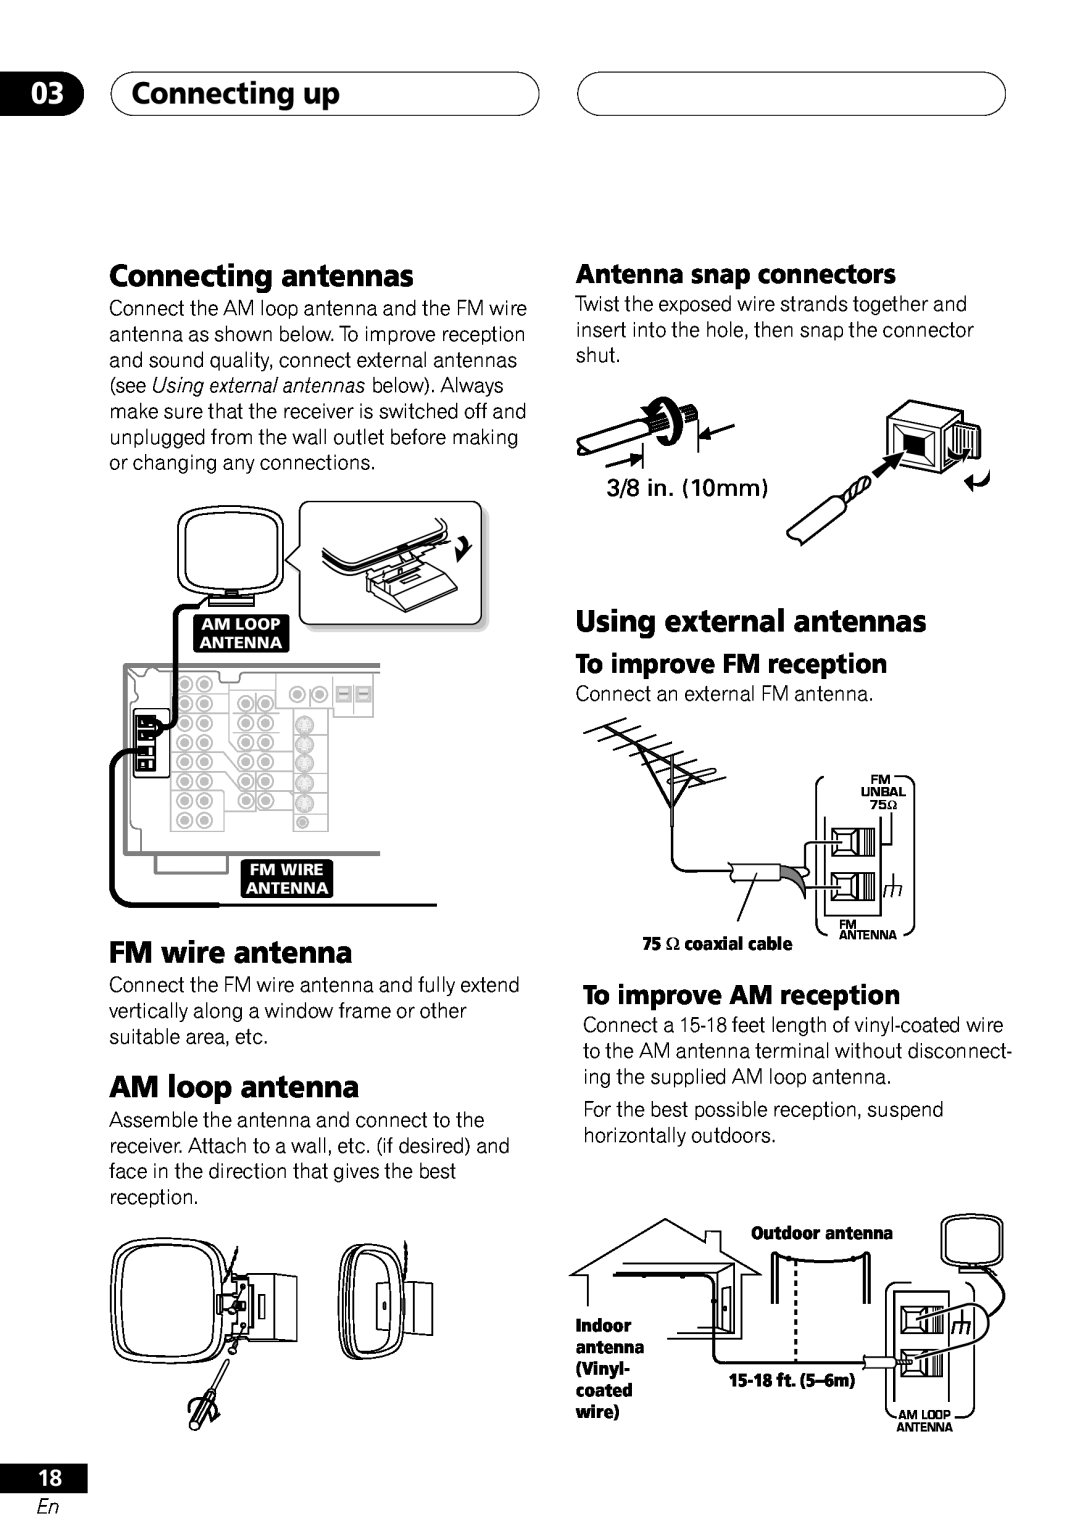 Pioneer VSX-41 manual 03Connecting up Connecting antennas, FM wire antenna, AM loop antenna, Using external antennas 